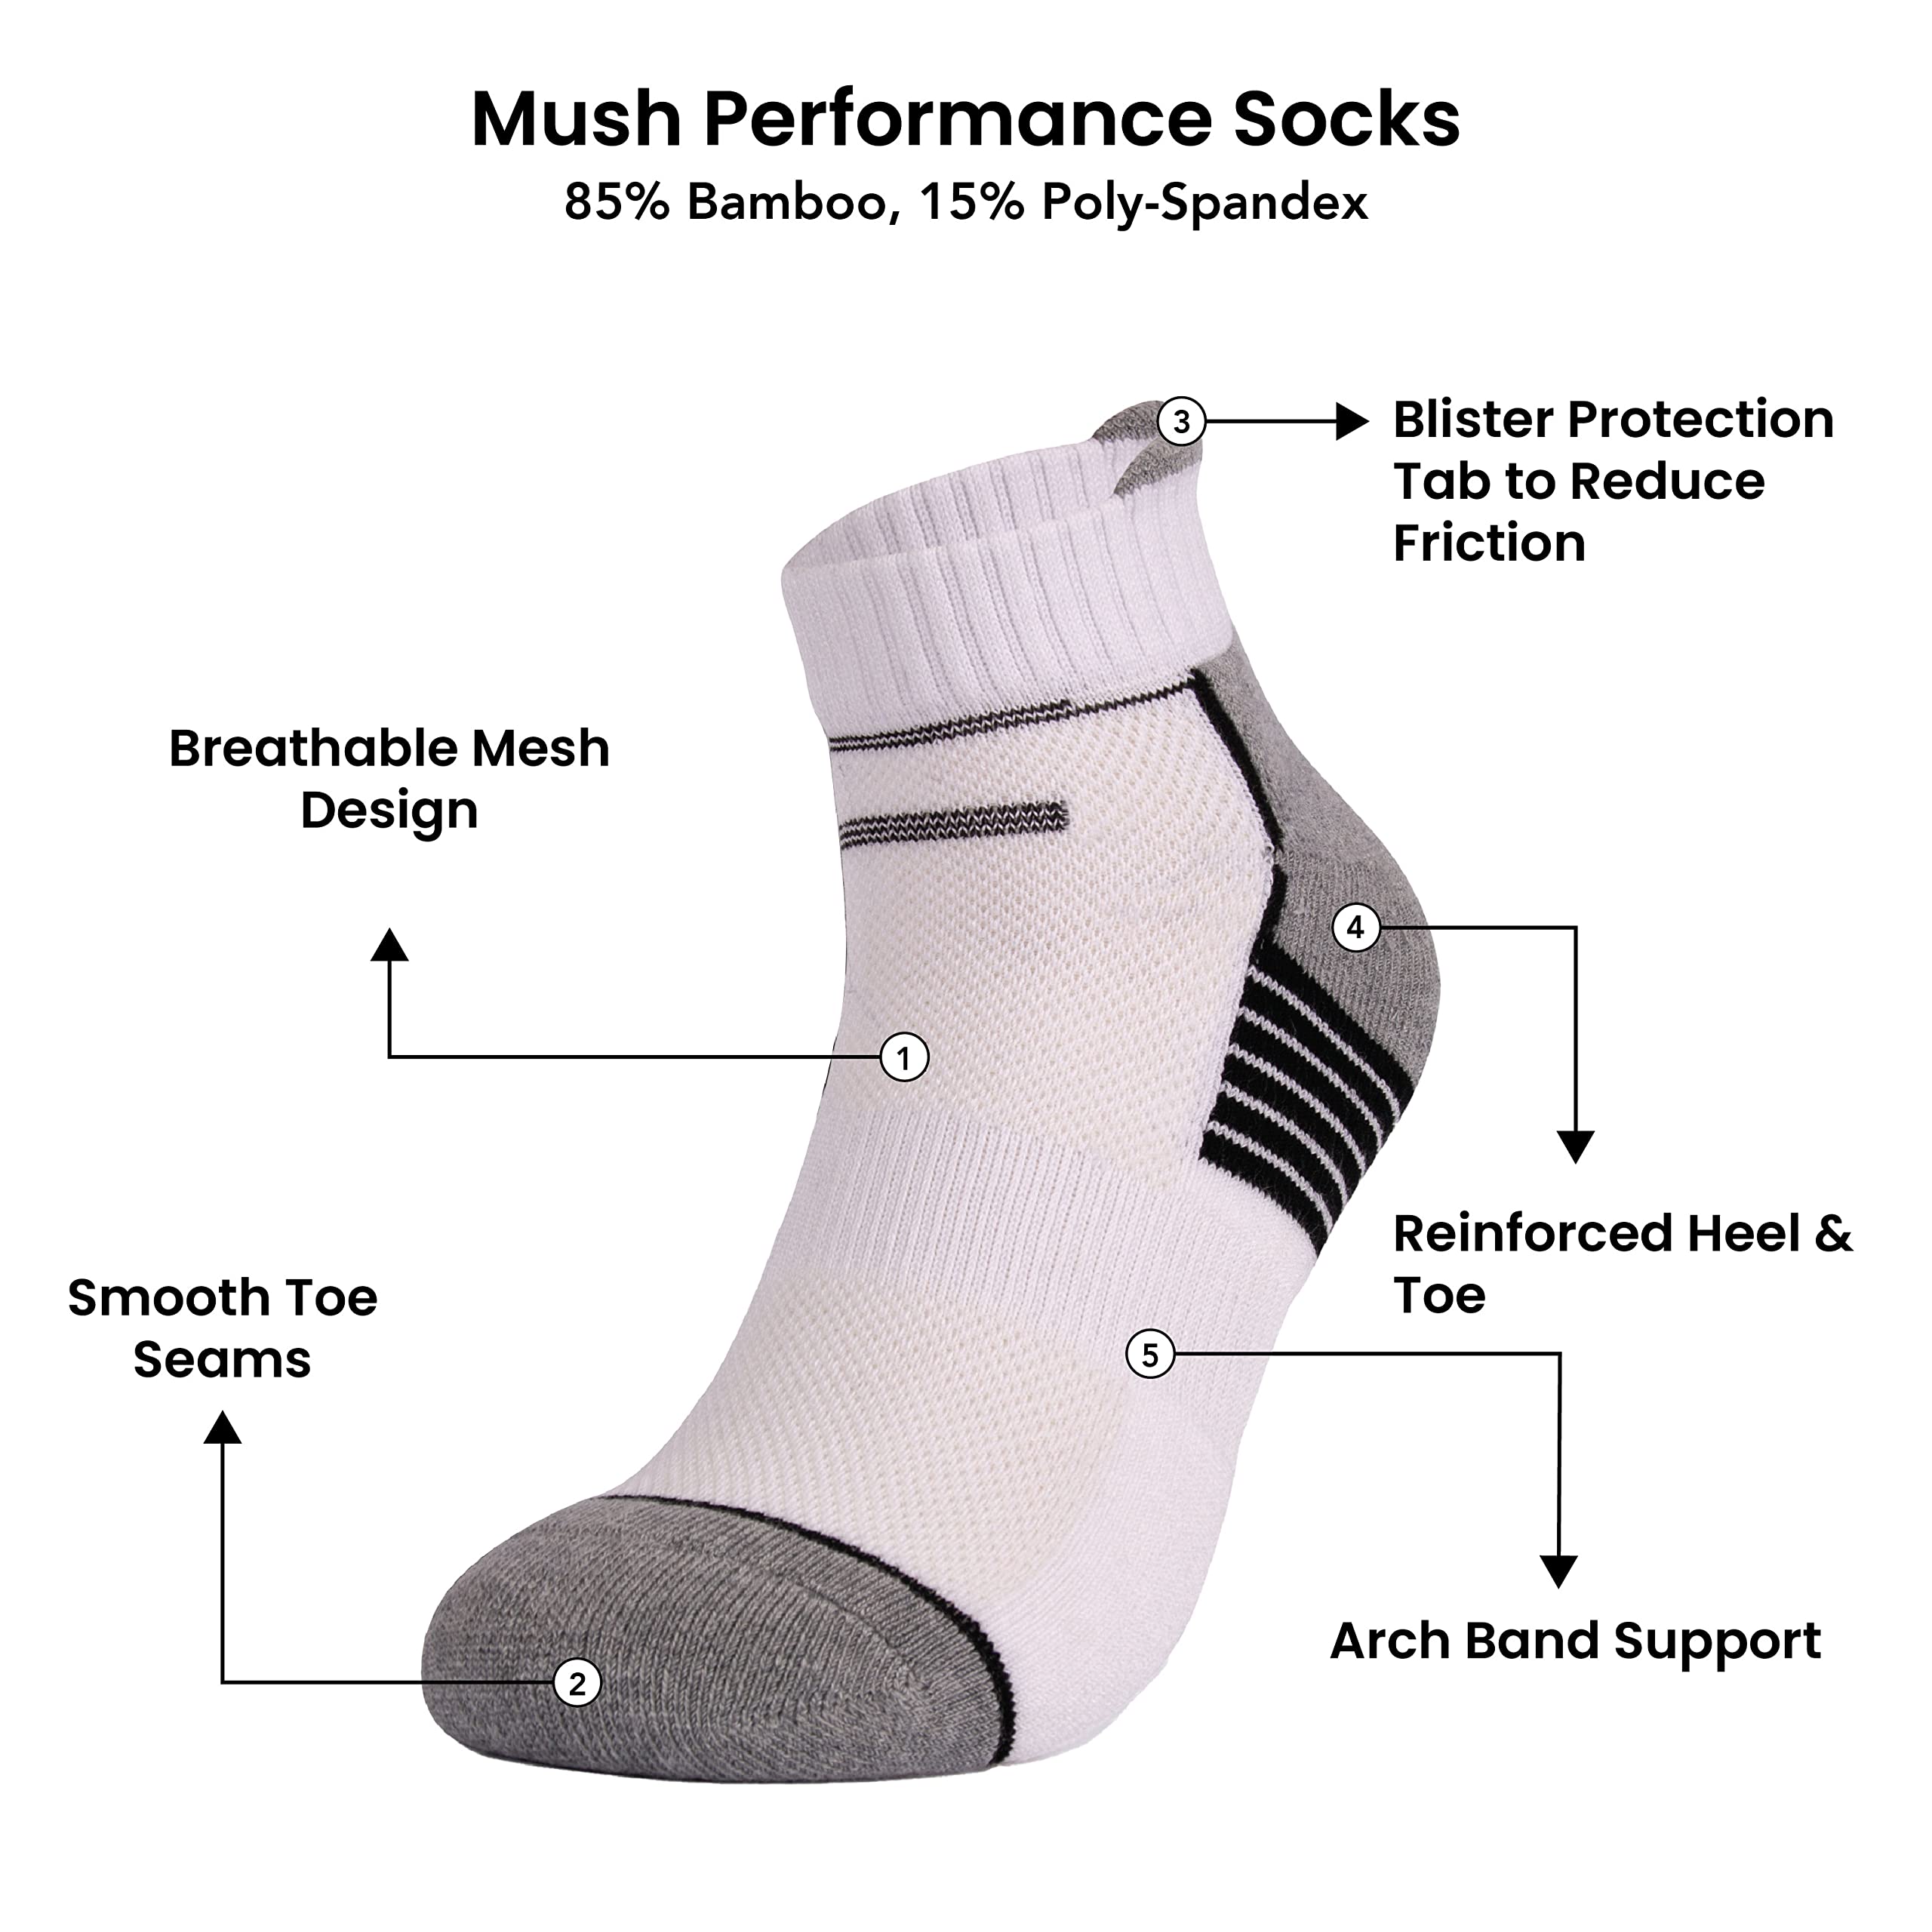 Mush Bamboo Performance Socks for Men || Sports & Casual Wear Ultra Soft, Anti Odor, Breathable Ankle Length Pack of 3 UK Size 6-10 (White, 3)